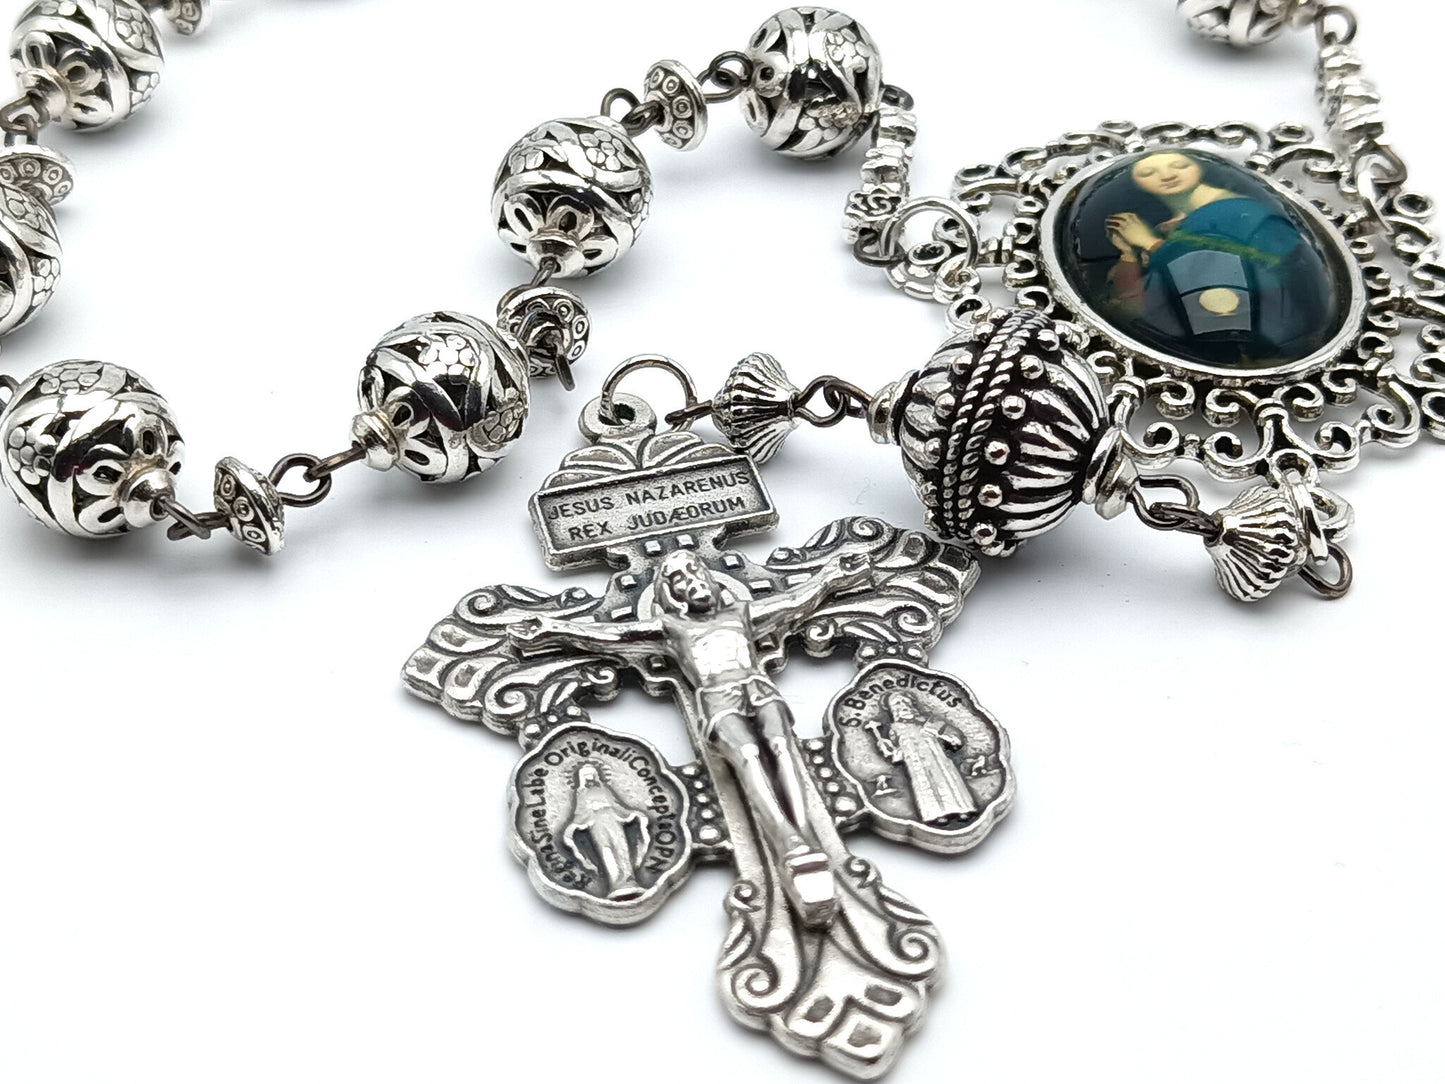 Holy Eucharist unique rosary beads single decade with silver beads, pardon crucifix and picture centre medal.